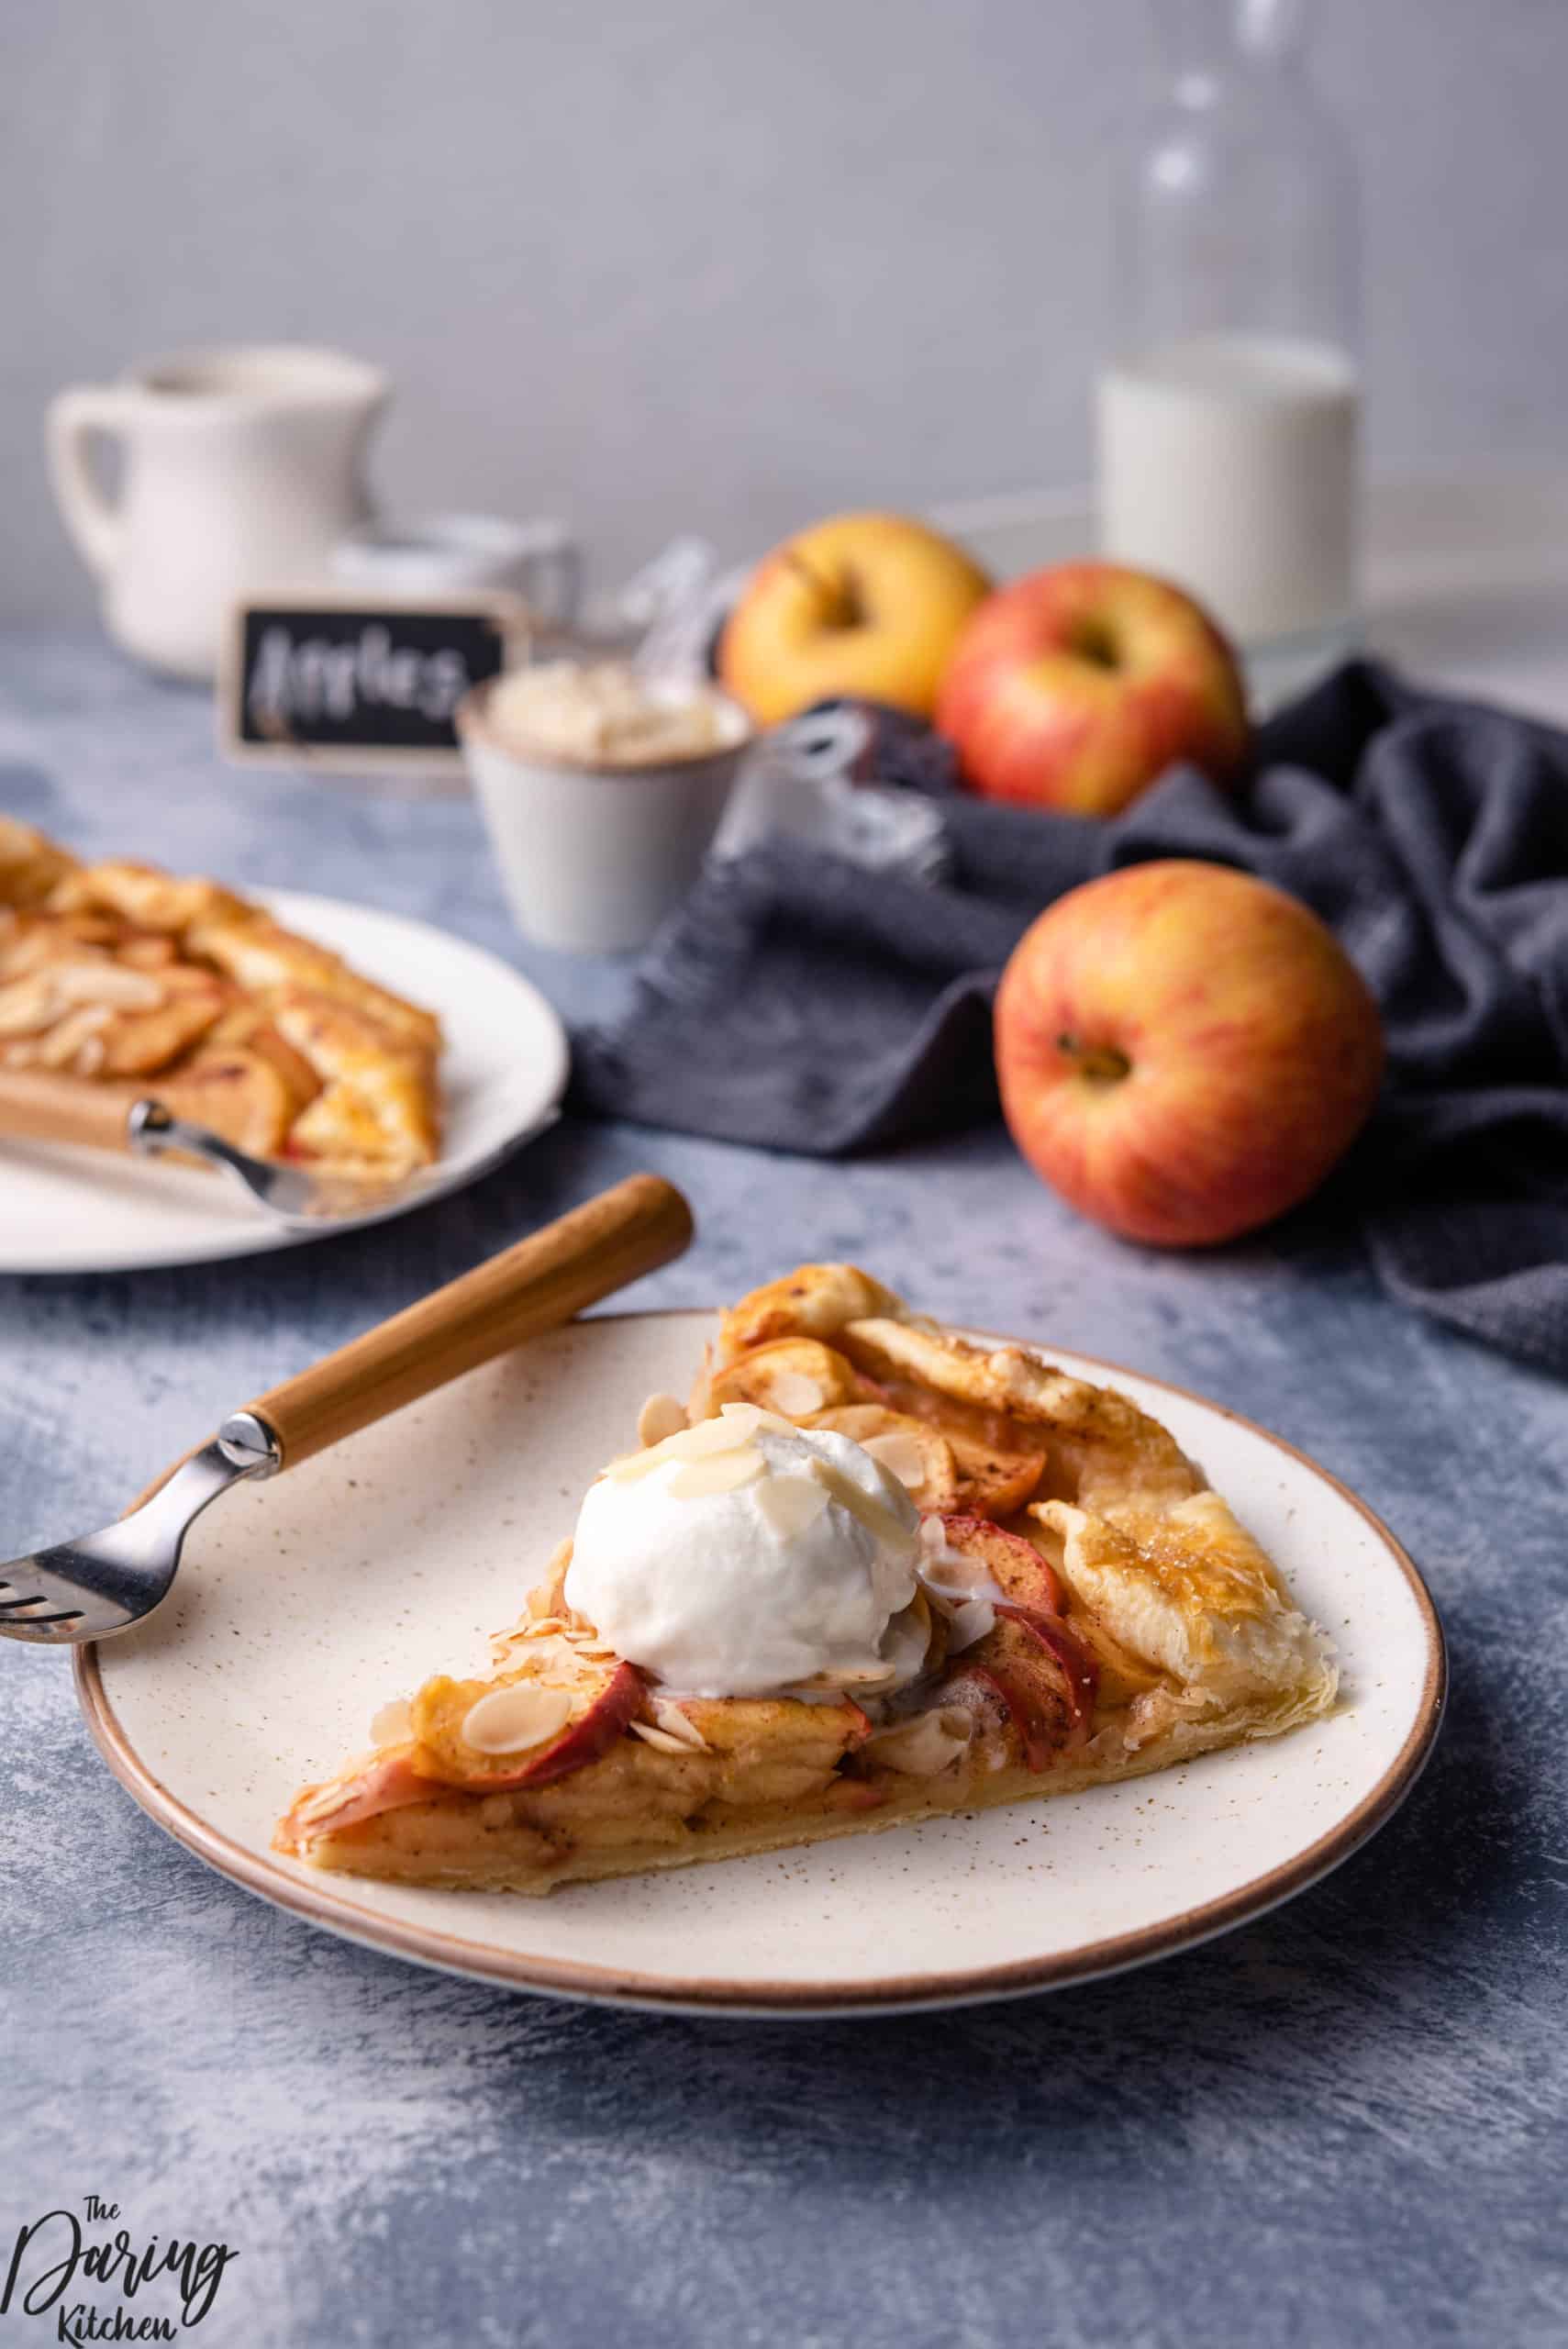 Easy Apple Galette Recipe With Puff Pastry - Daring Kitchen